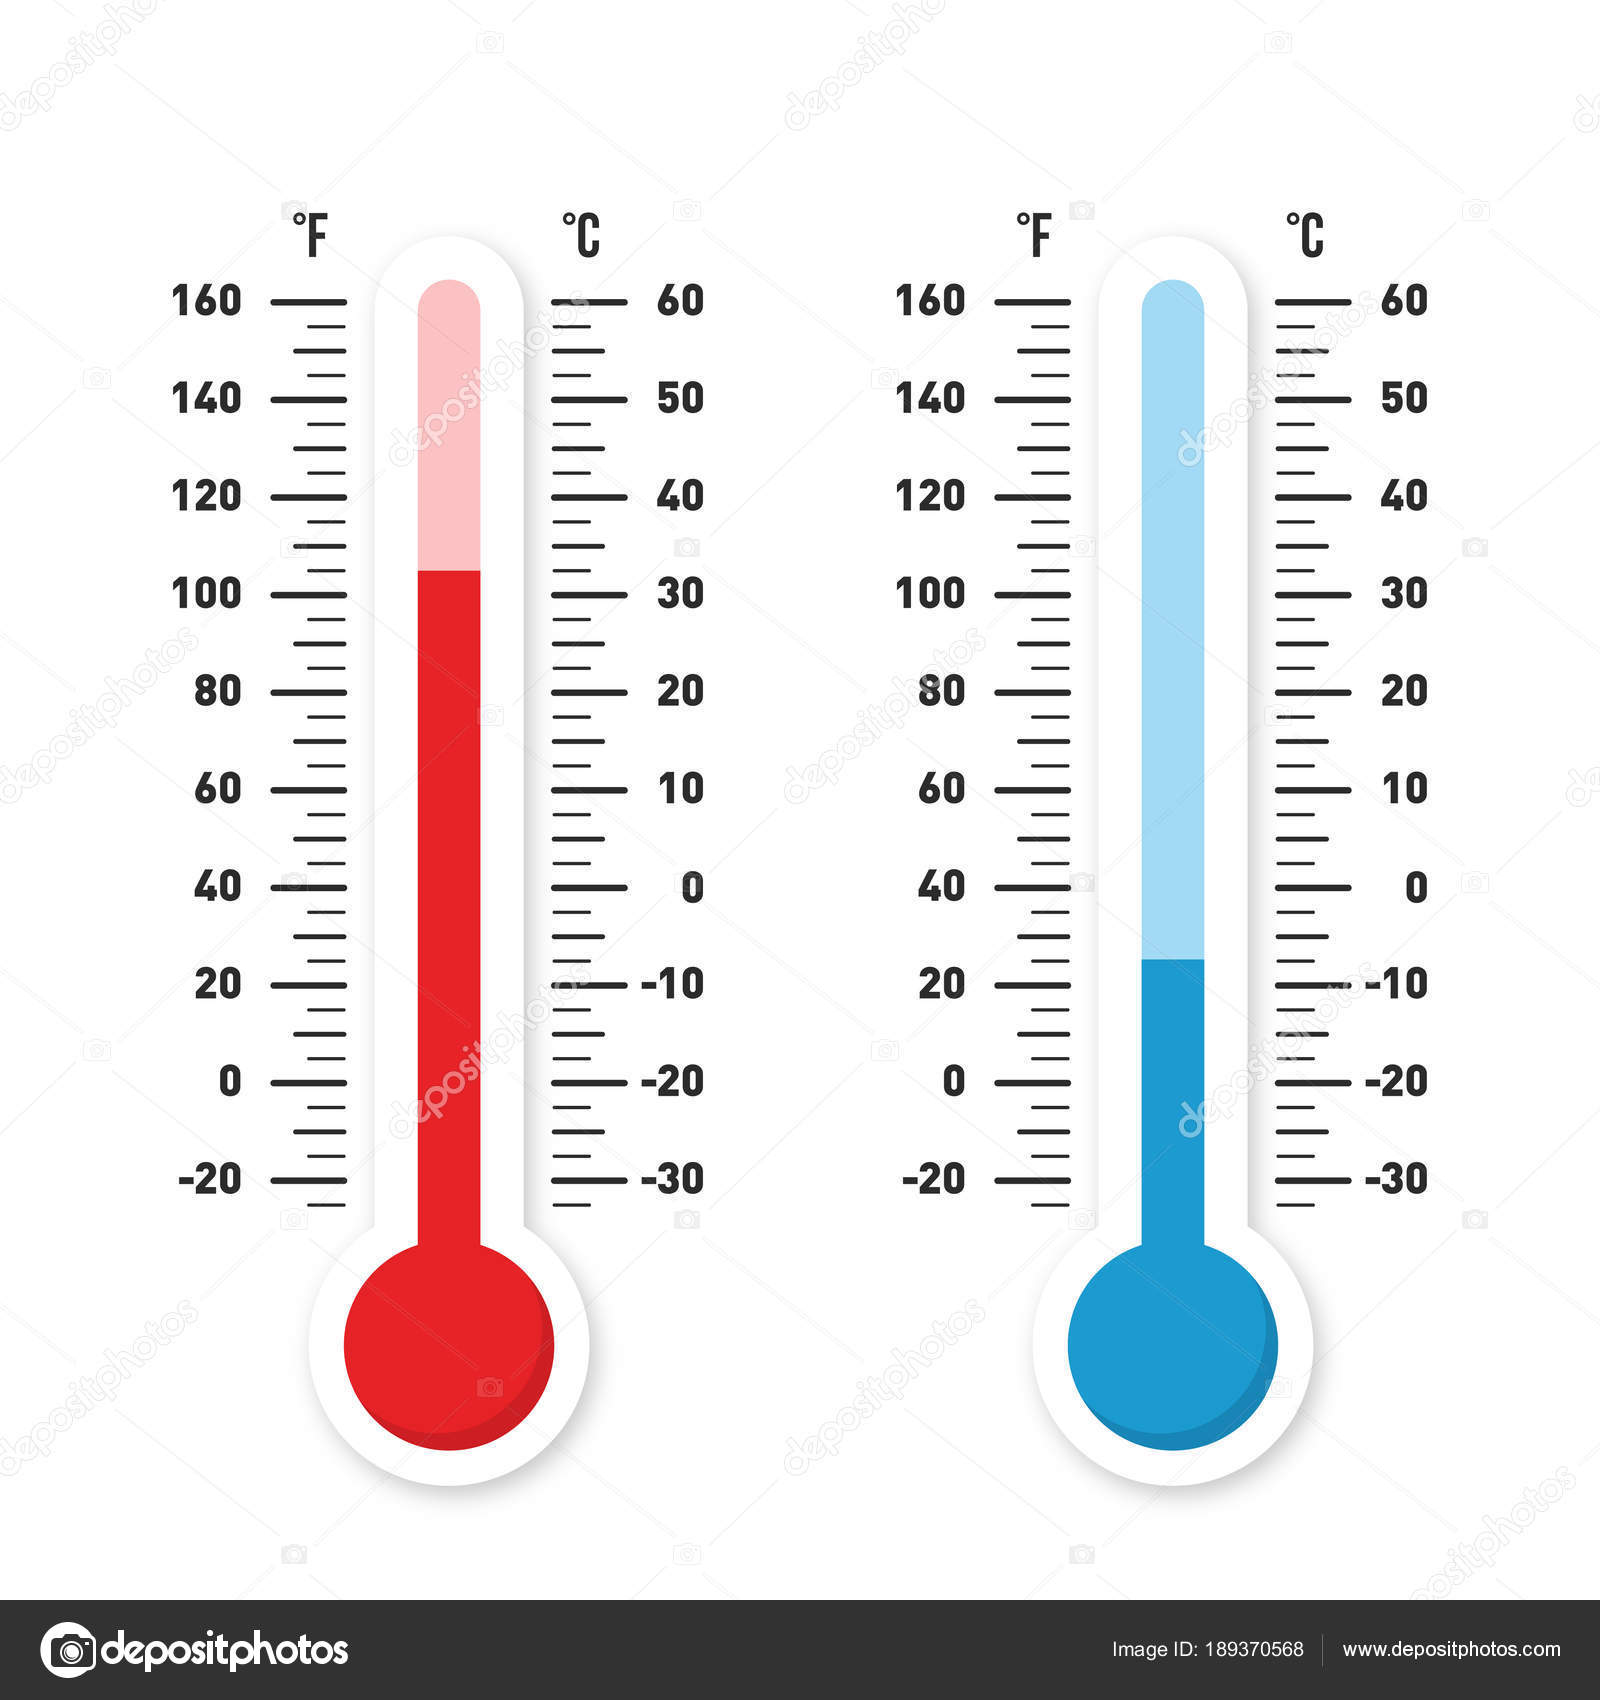 https://st3.depositphotos.com/13905956/18937/v/1600/depositphotos_189370568-stock-illustration-thermometers-measuring-heat-and-cold.jpg